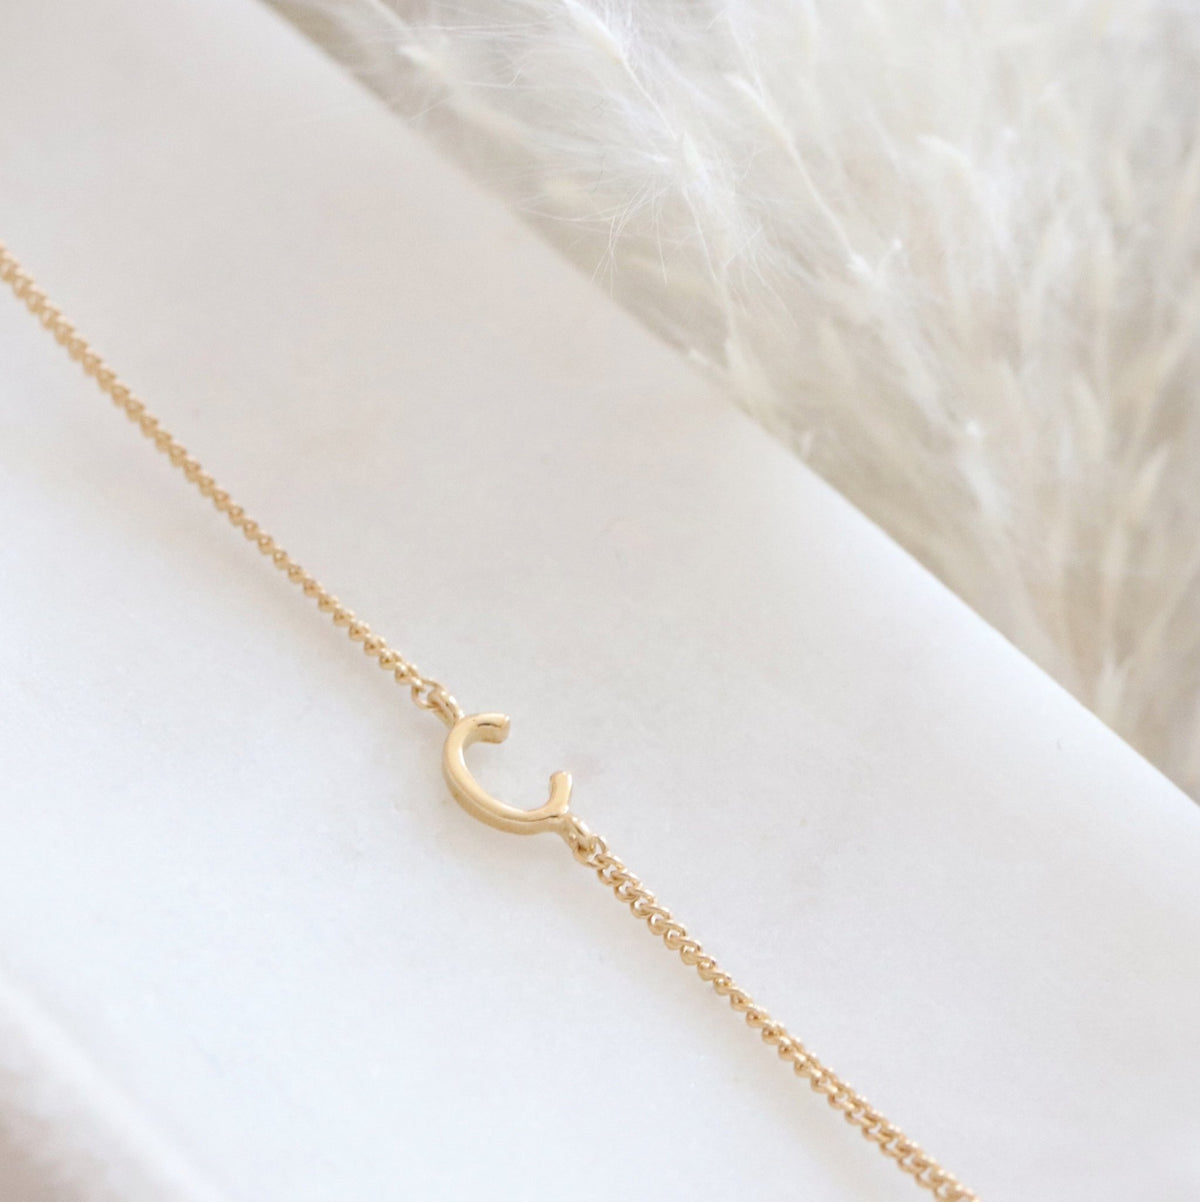 NOTABLE OFFSET INITIAL NECKLACE - C - GOLD - SO PRETTY CARA COTTER